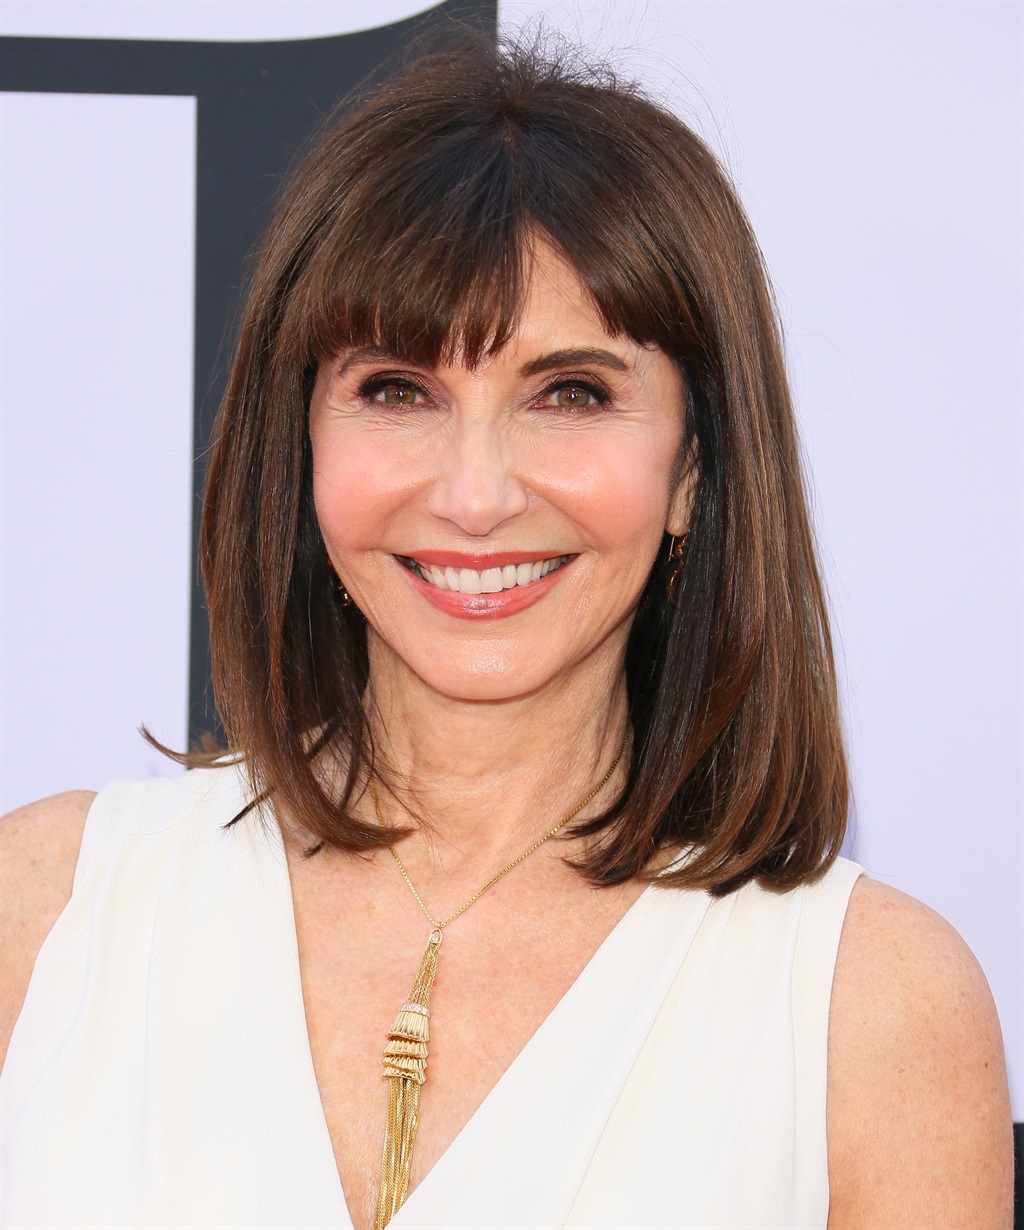 Mary Steenburgen.
Foto: Gallo Images/Getty Images